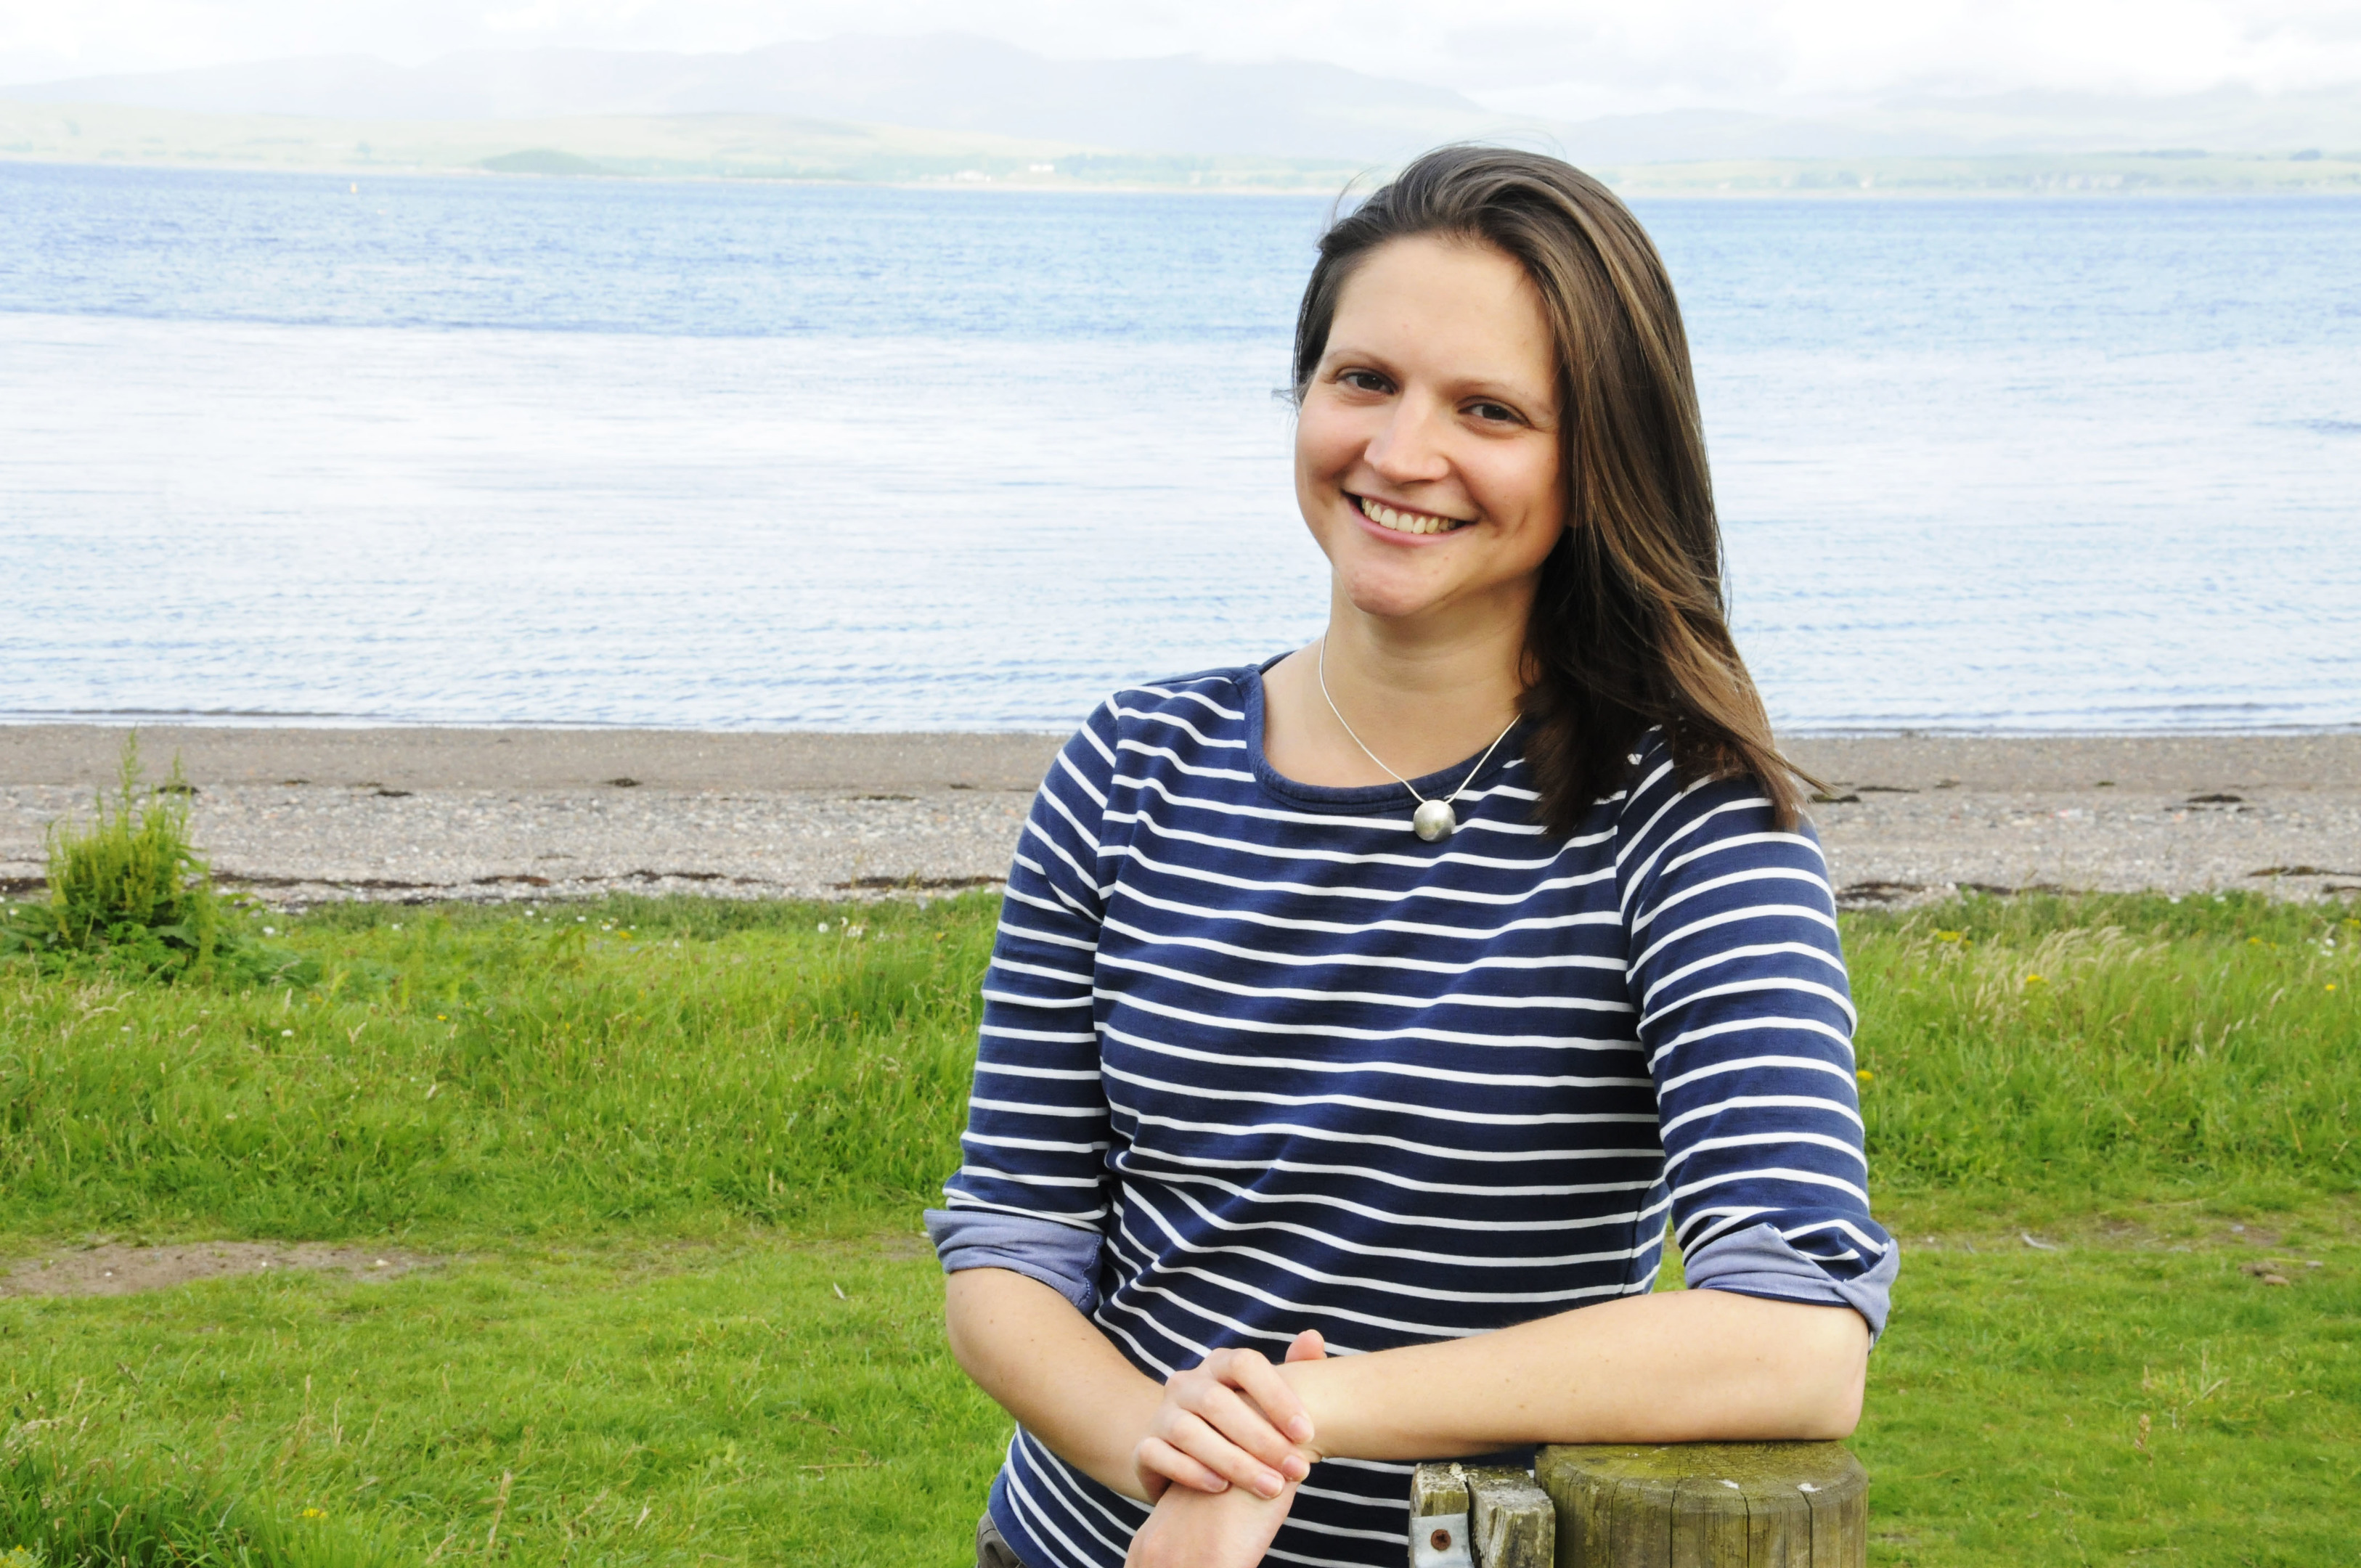 Laura Hobbs named University of the Highlands and Islands (UHI) Postgraduate Student of the Year